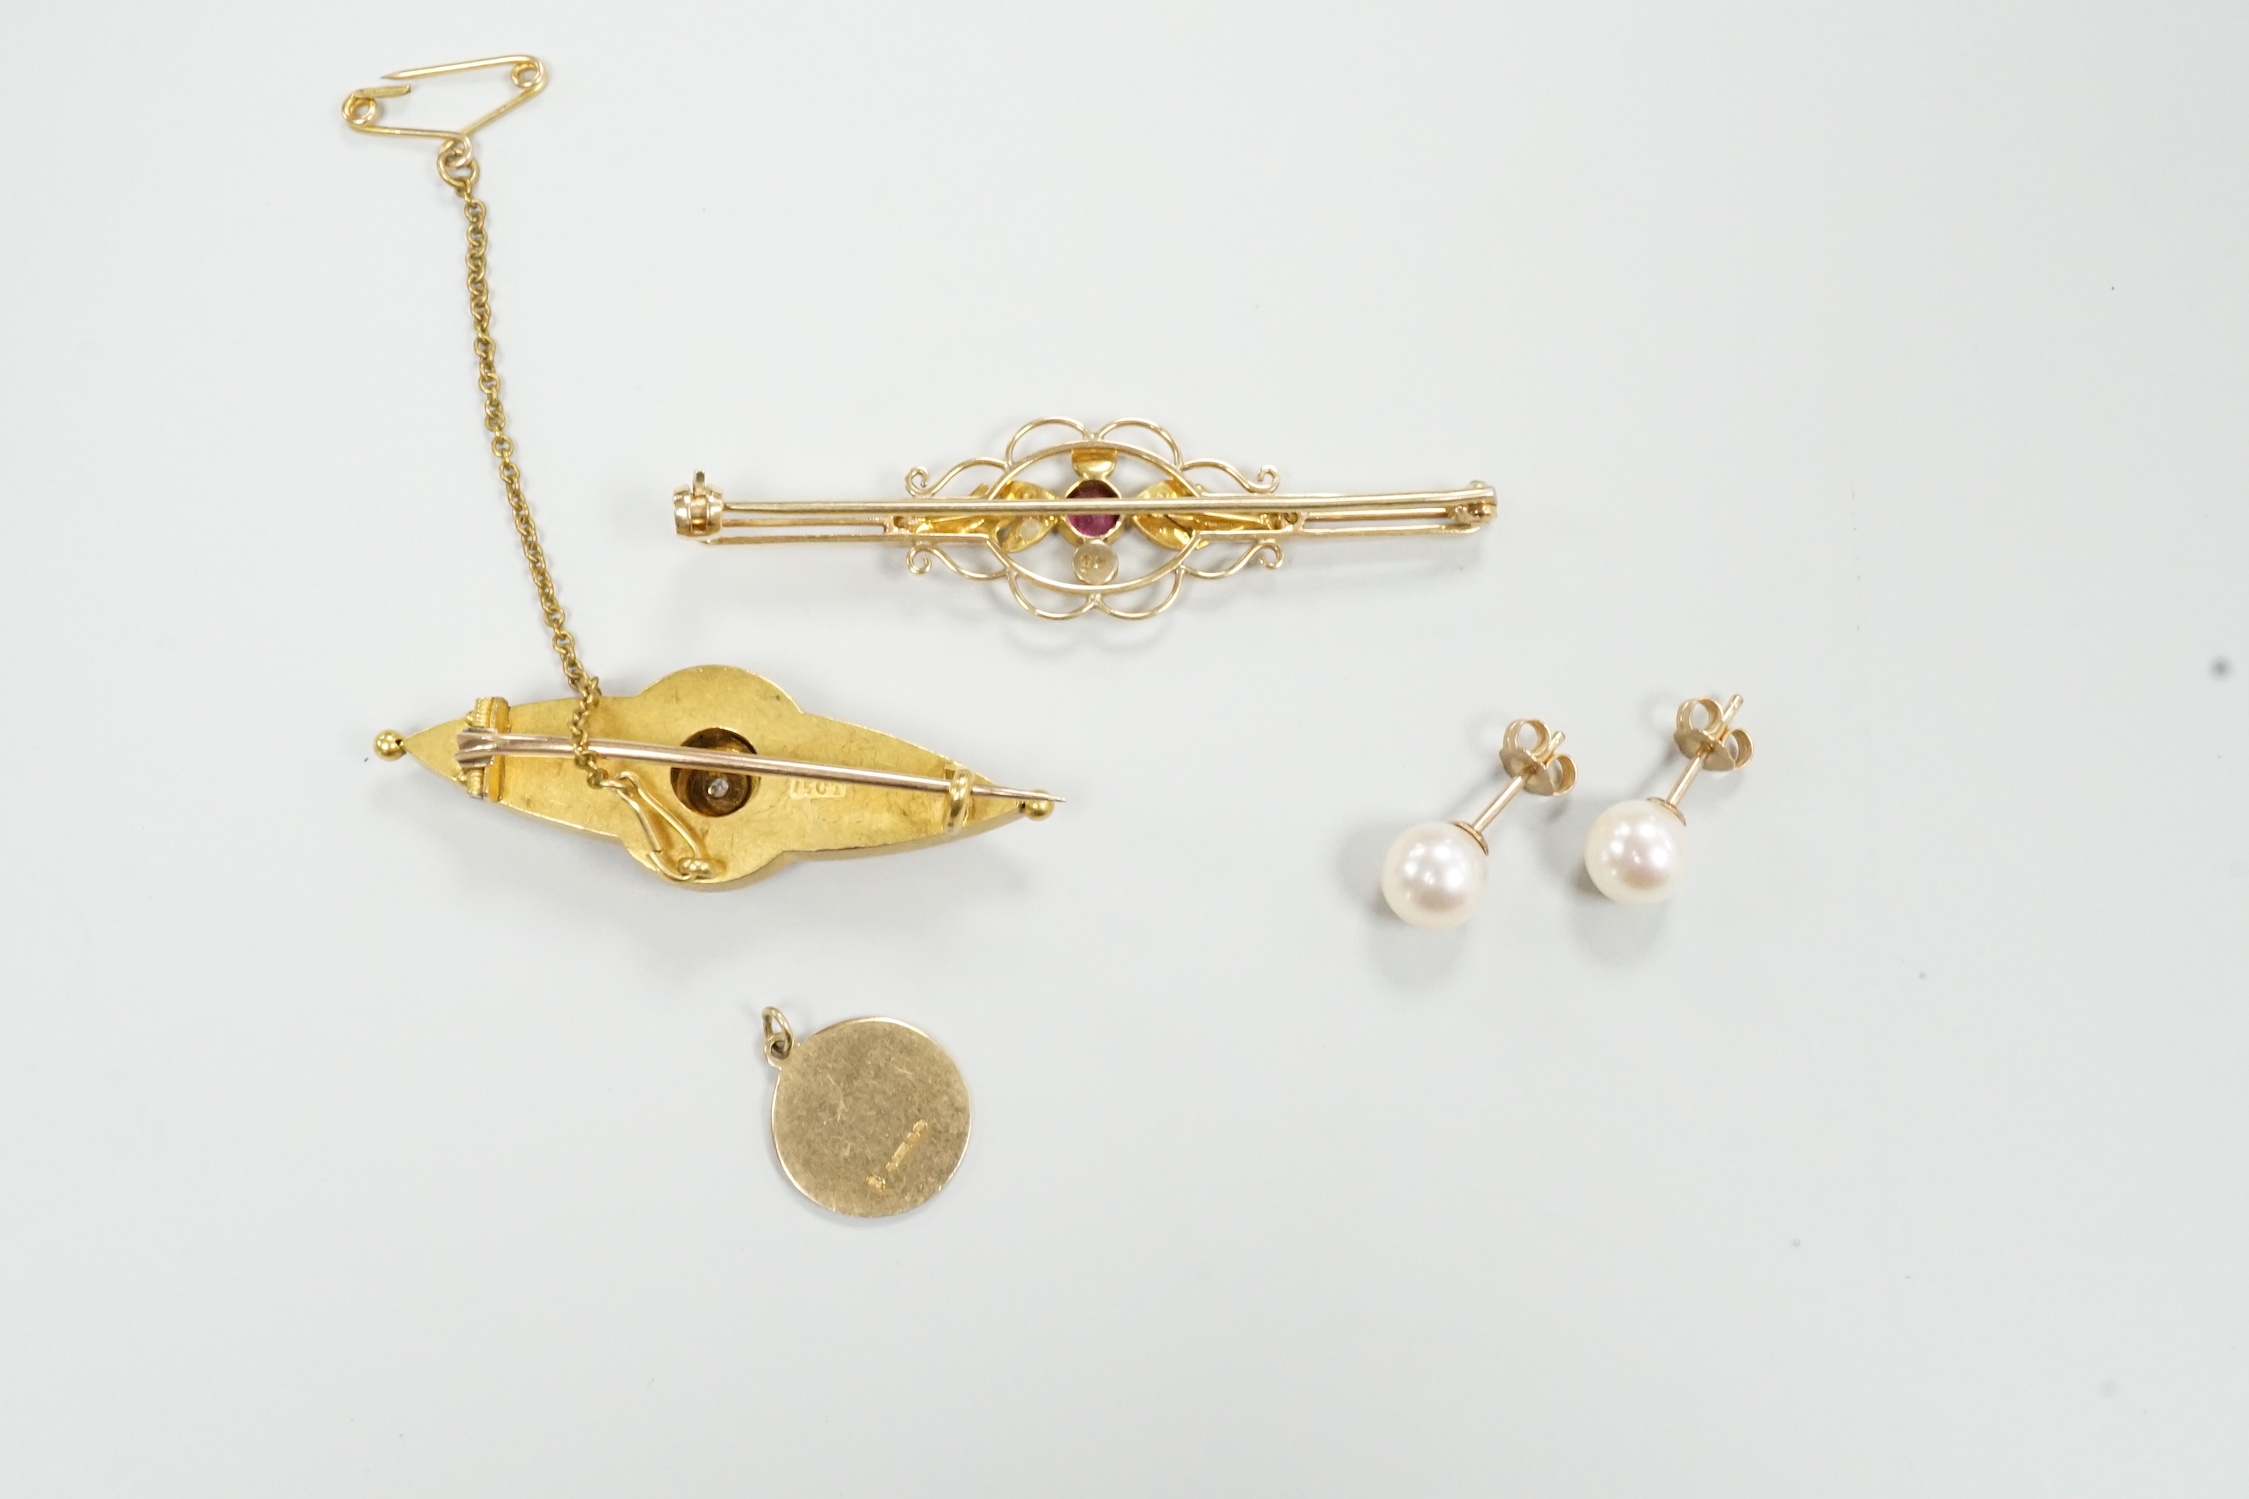 A Victorian 15ct and diamond set brooch, 45mm, a similar 9ct and gem set brooch, a pair of cultured pearl ear studs and a 9ct small medallion.